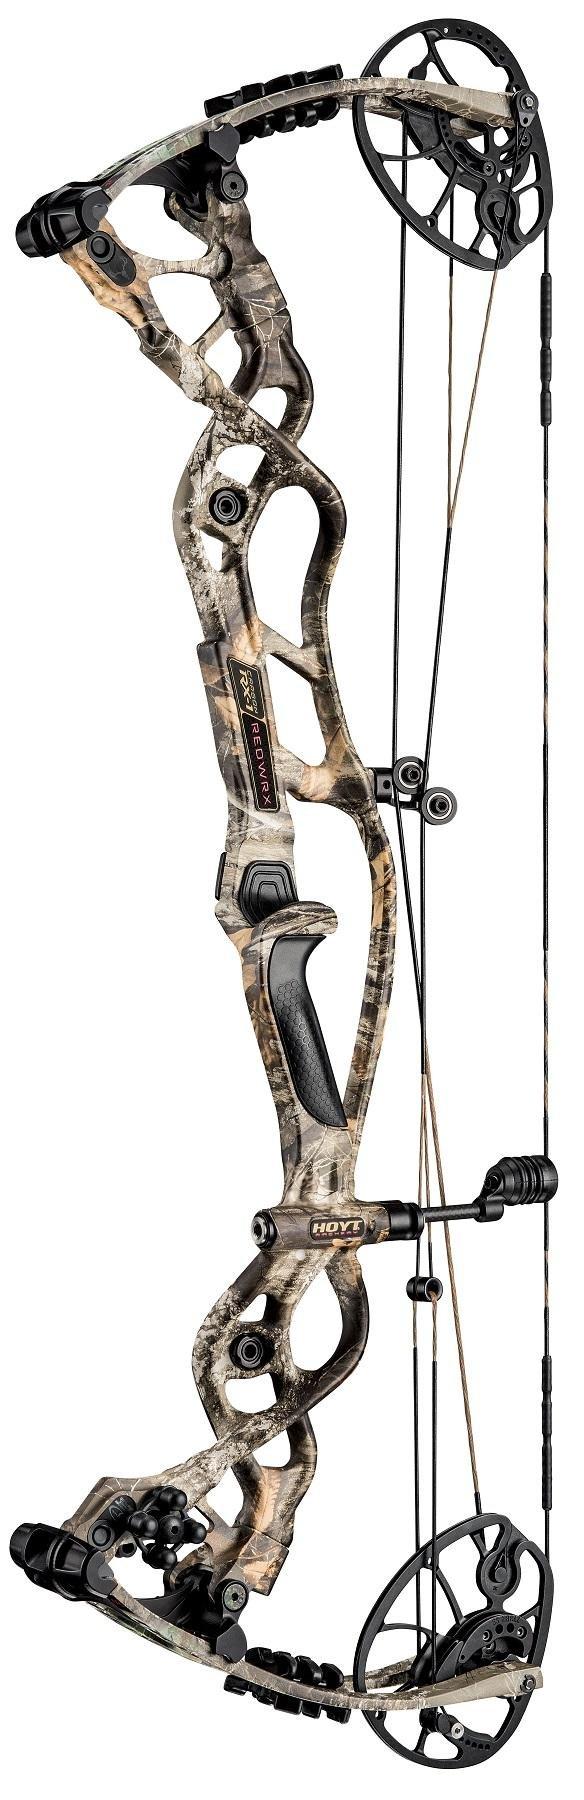  2018 Hoyt REDWRX Carbon RX-1 Series in Realtree Edge